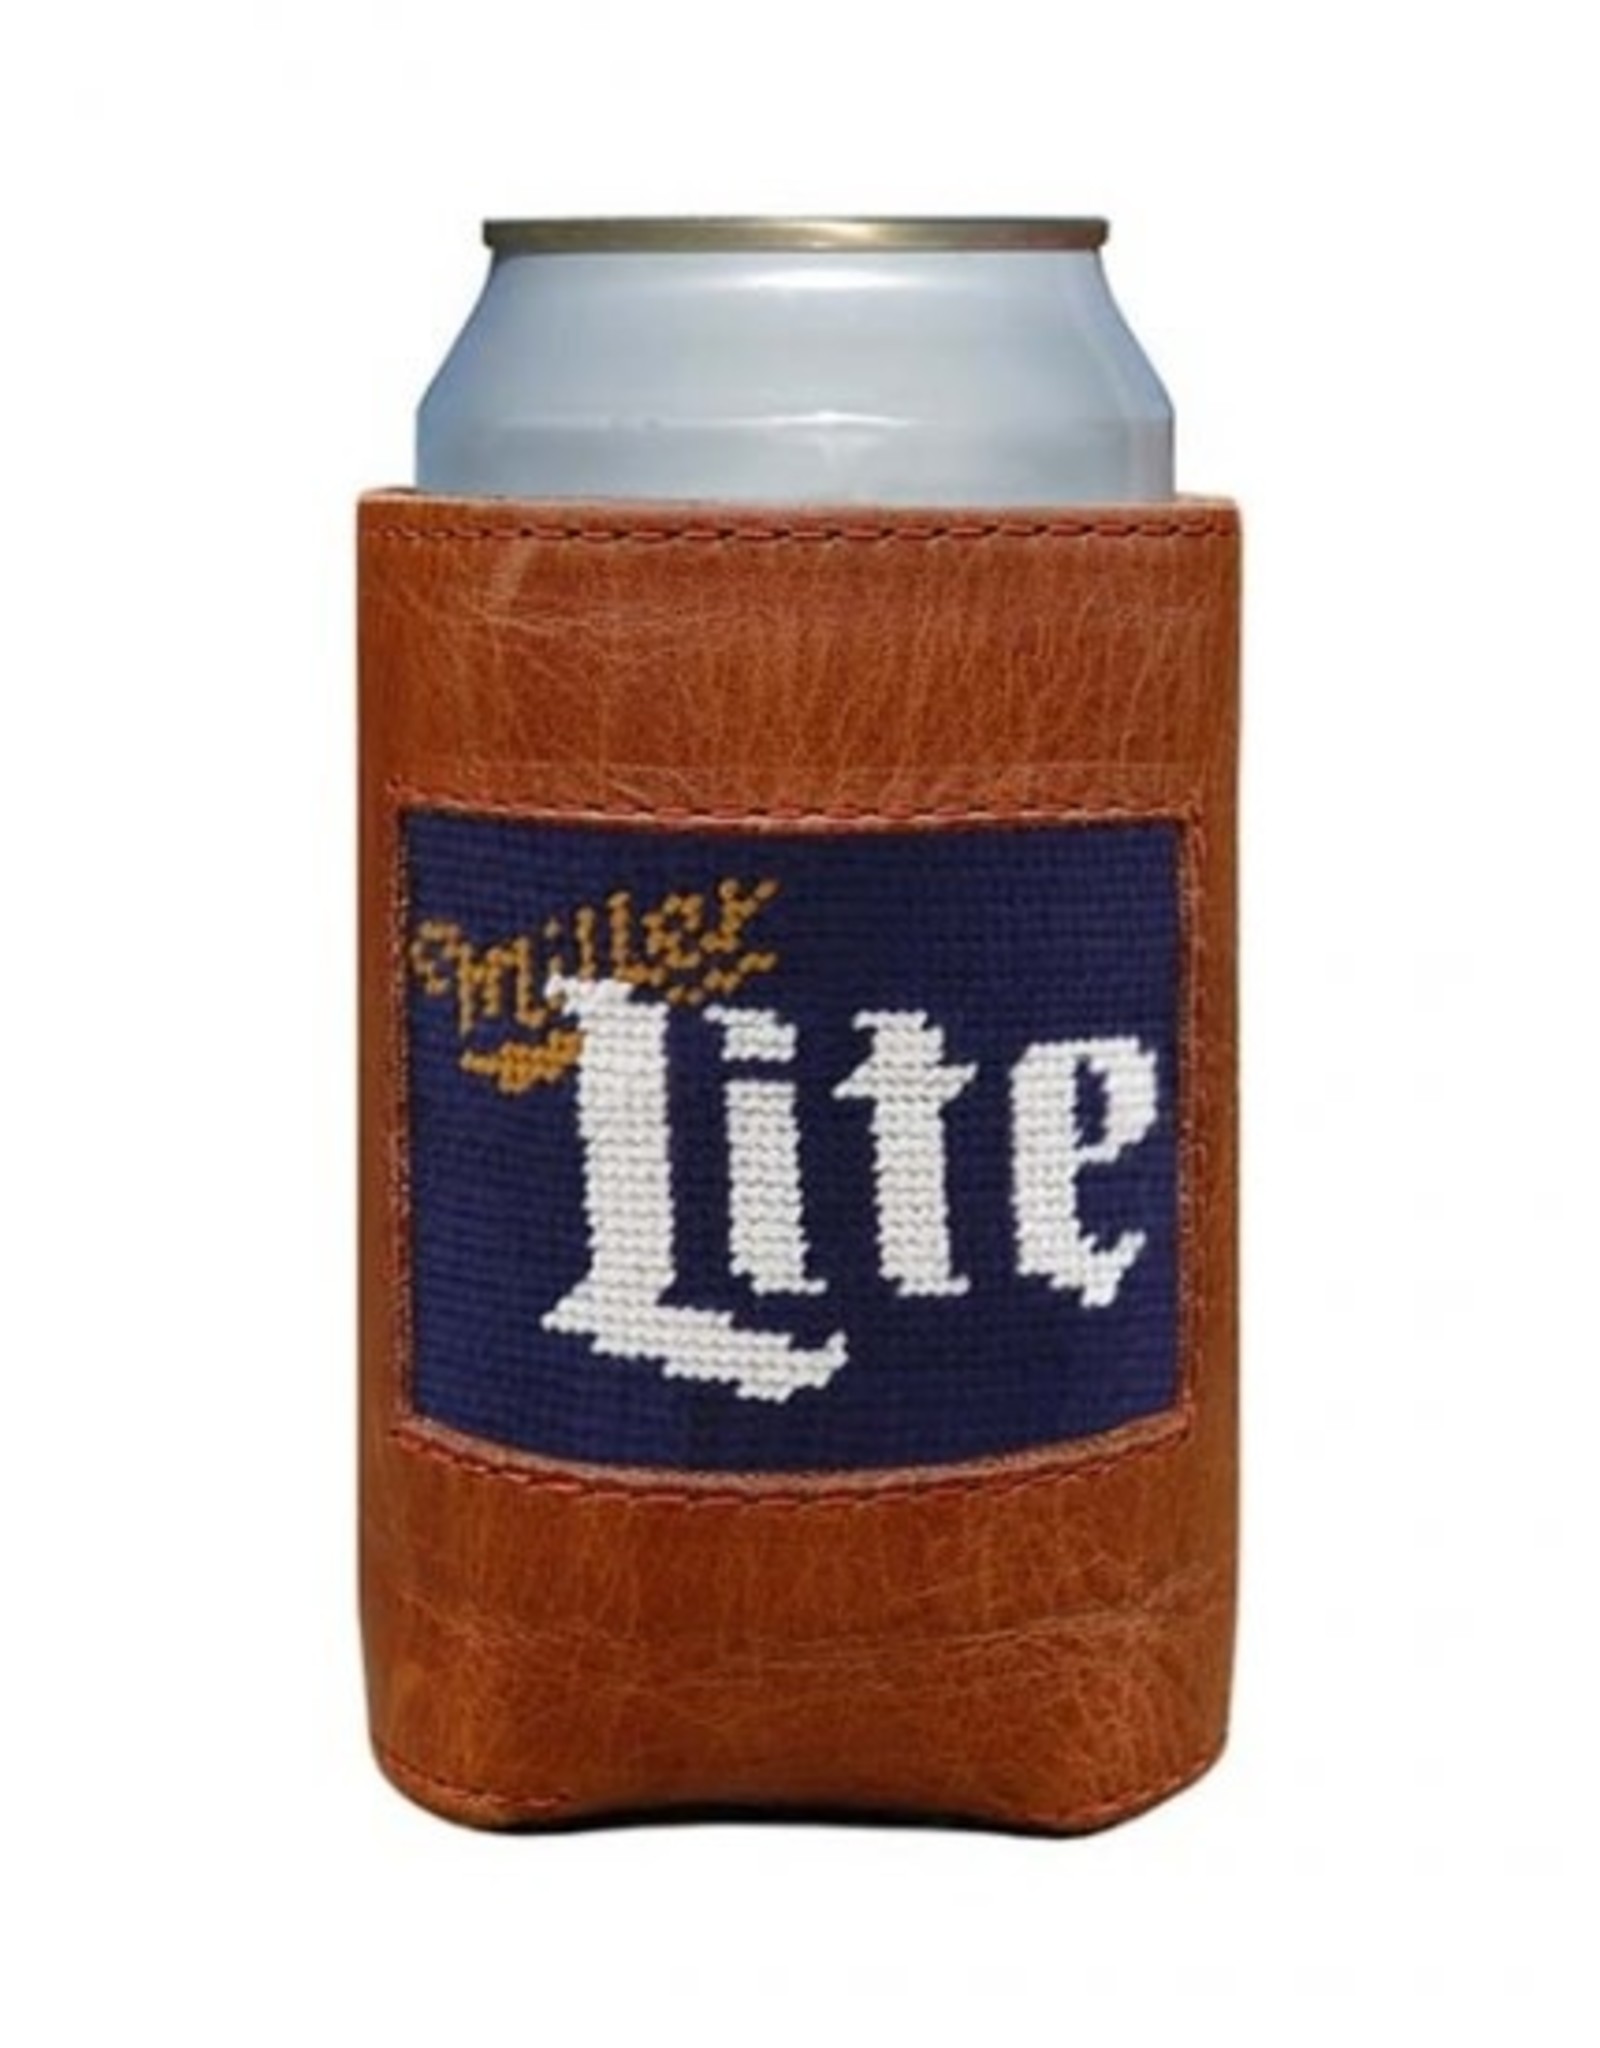 Smathers & Branson Smathers & Branson Coozie Miller Lite